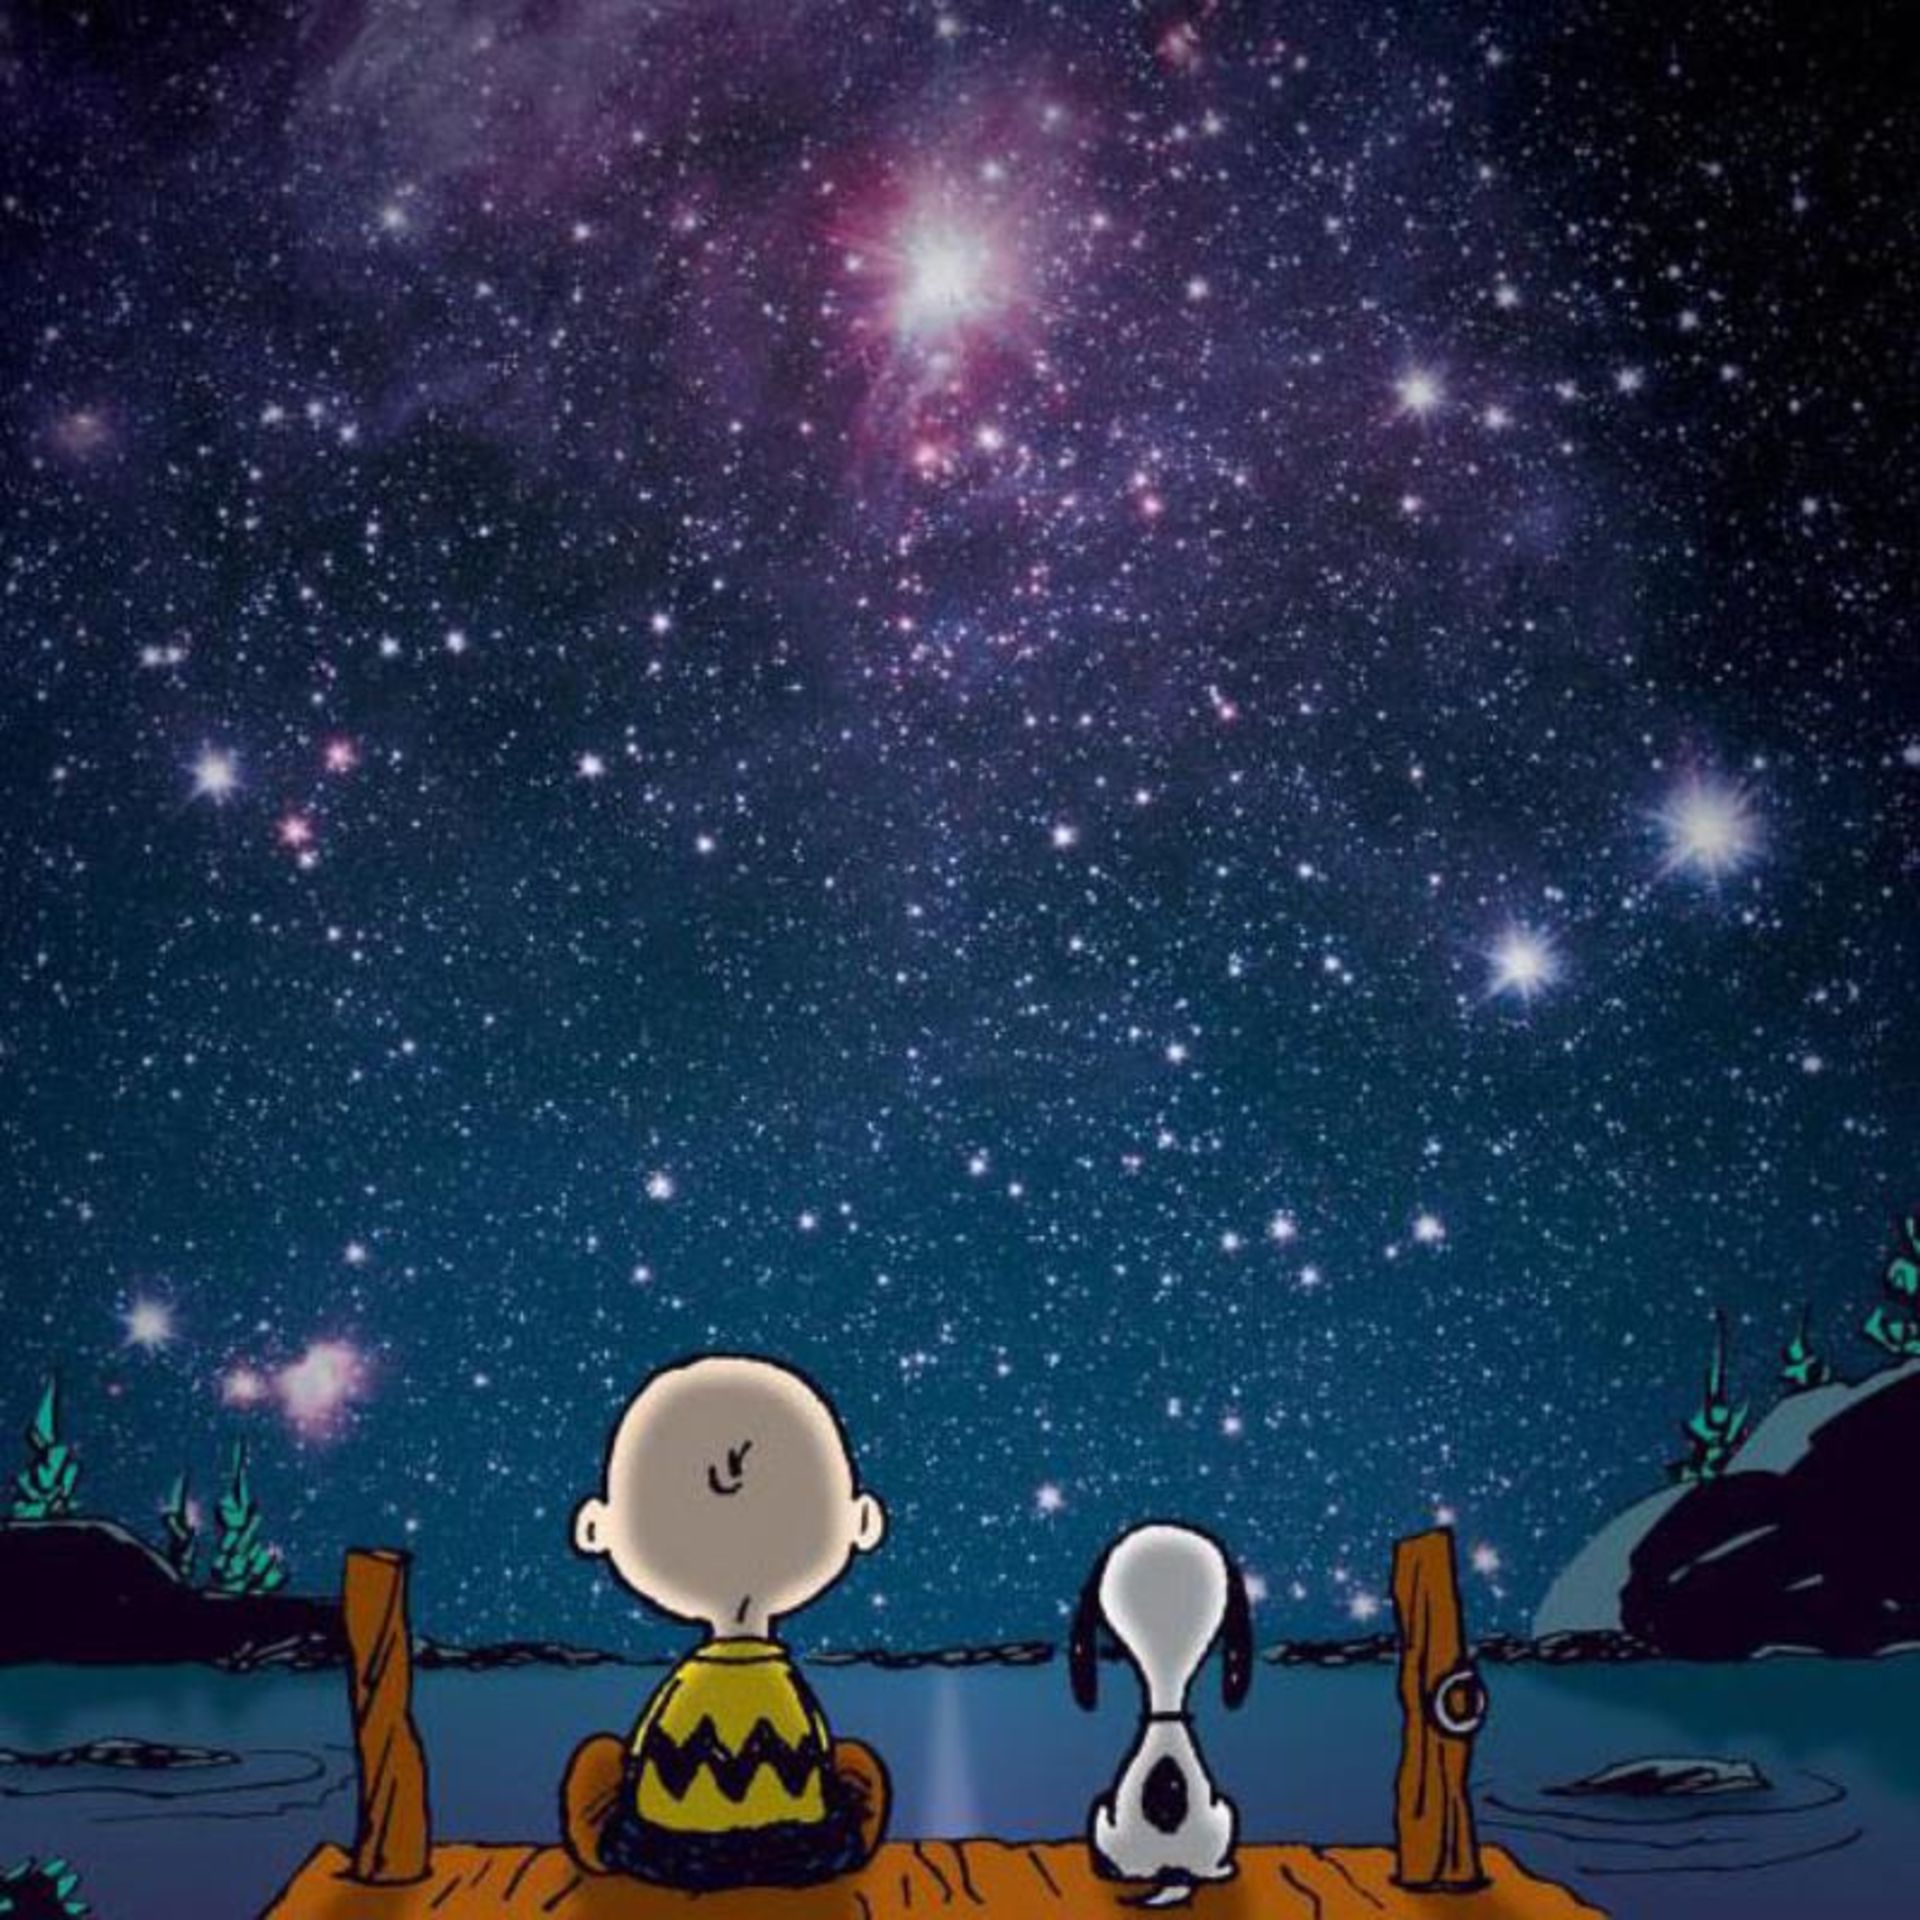 Stars by Peanuts - Image 2 of 2